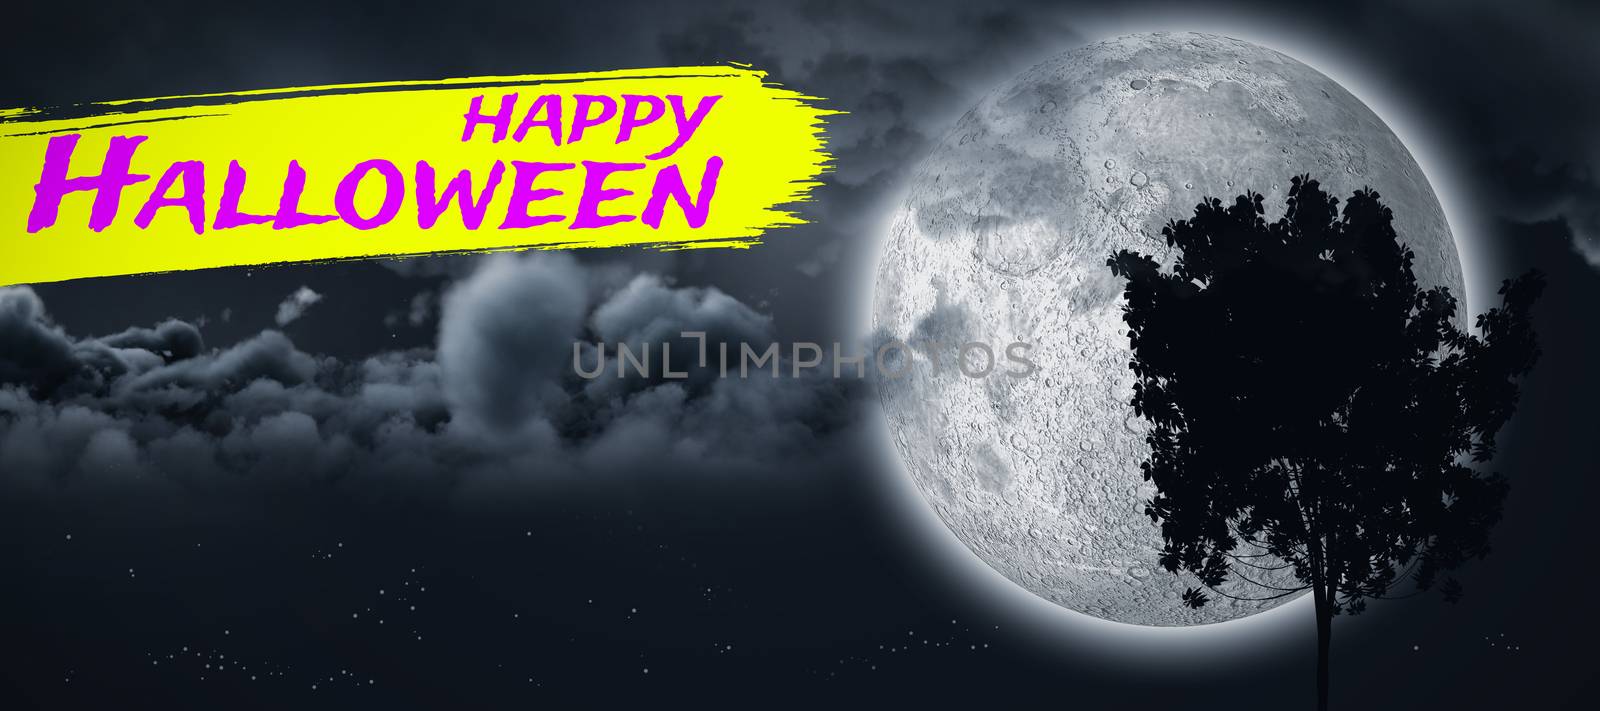 Digital image of happy Halloween text against moon shining behind a tree and clouds 